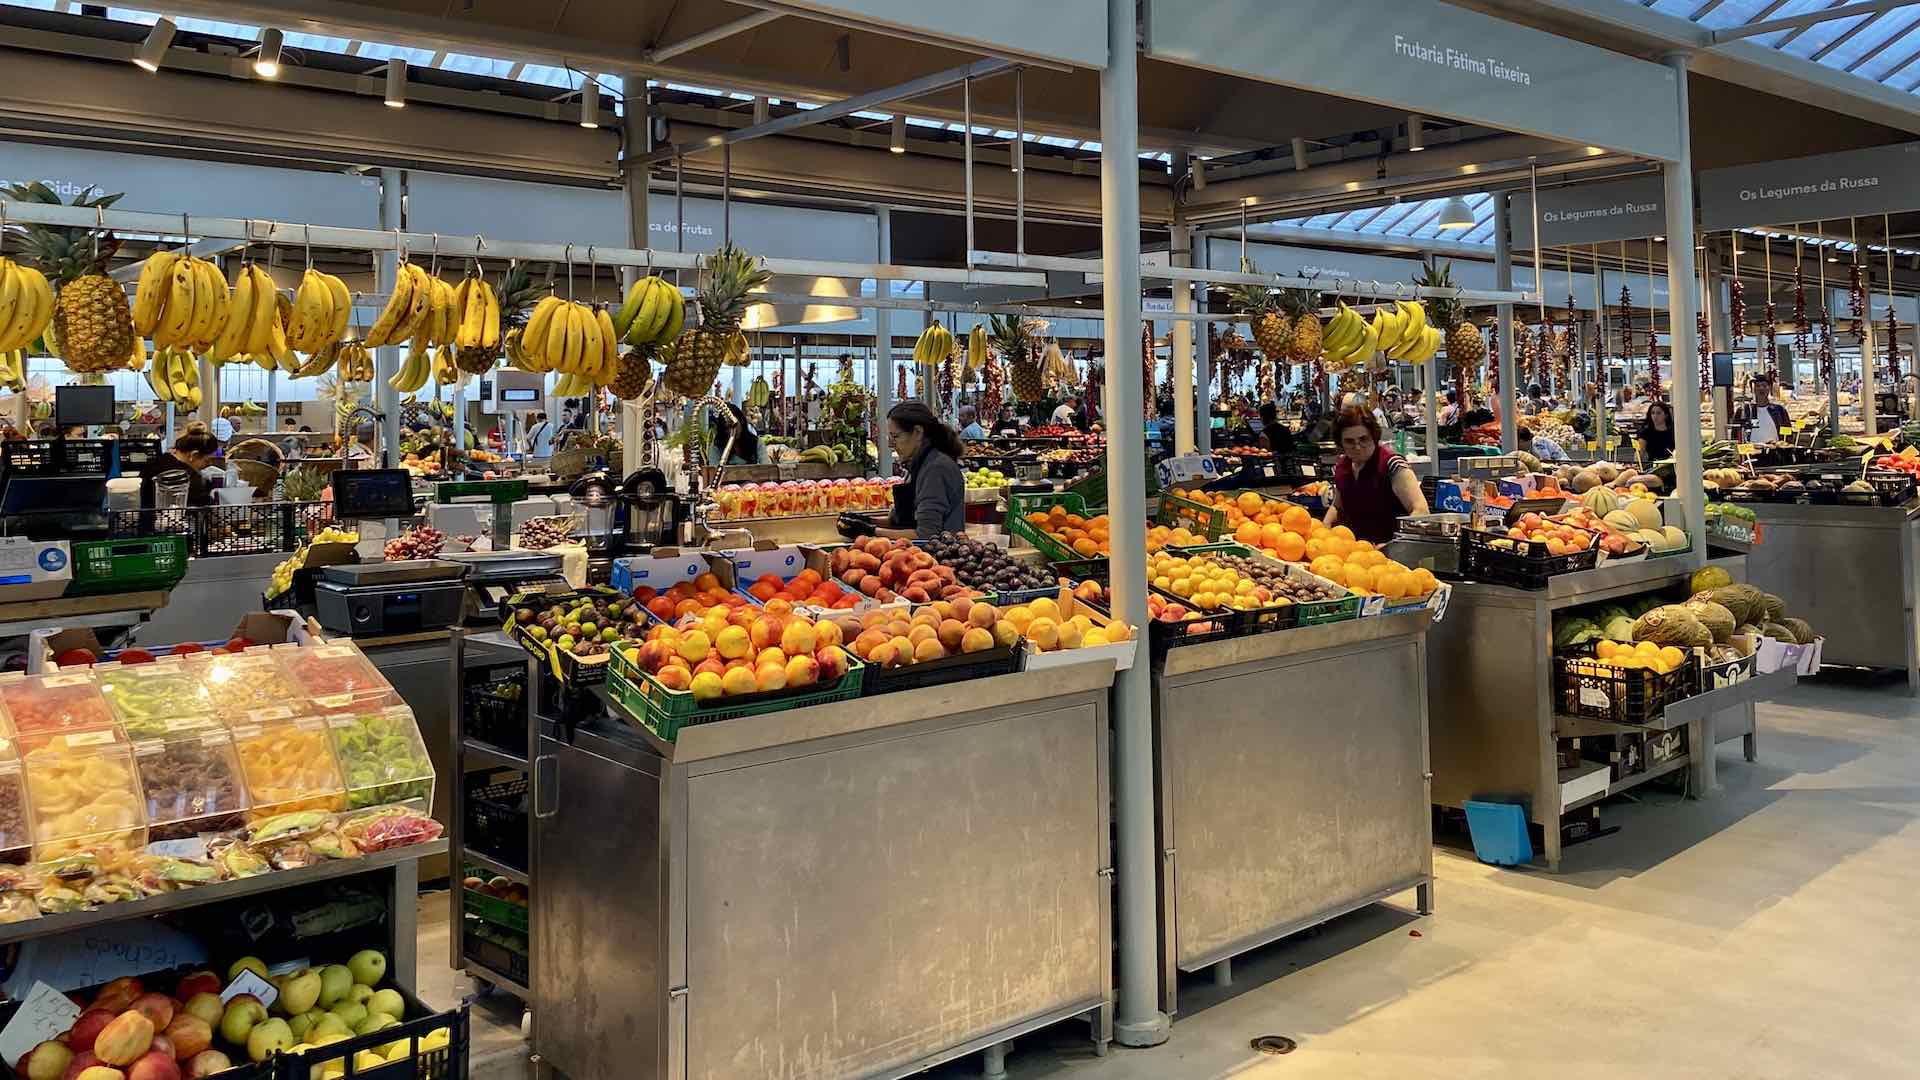 It certainly helps to have amazing access to fresh vegetables, fruits, breads, and more in every city. Central markets like this—and quality grocery stores—were a real treat!